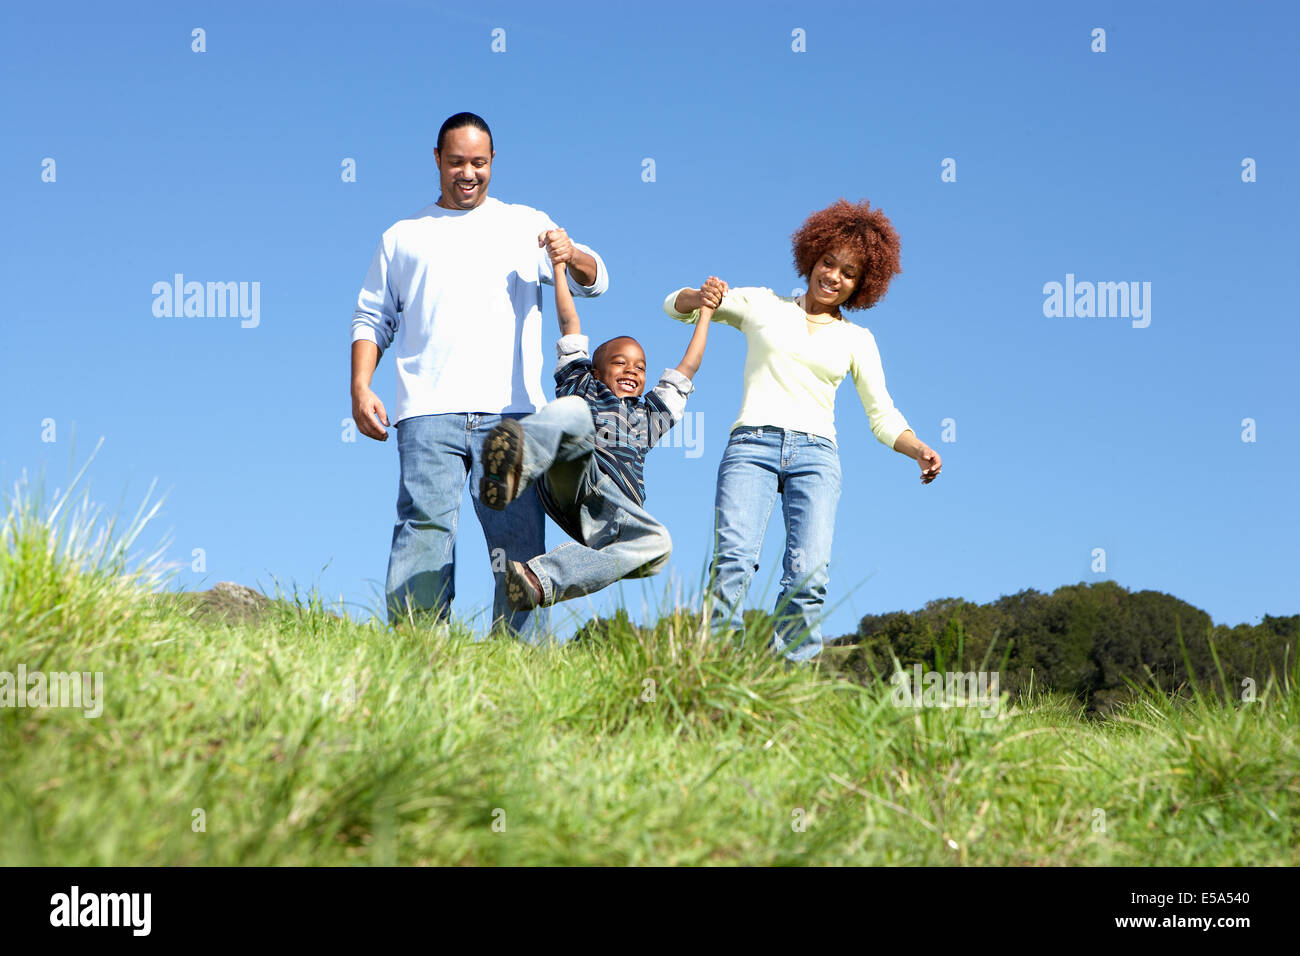 African American family walking together in field Stock Photo